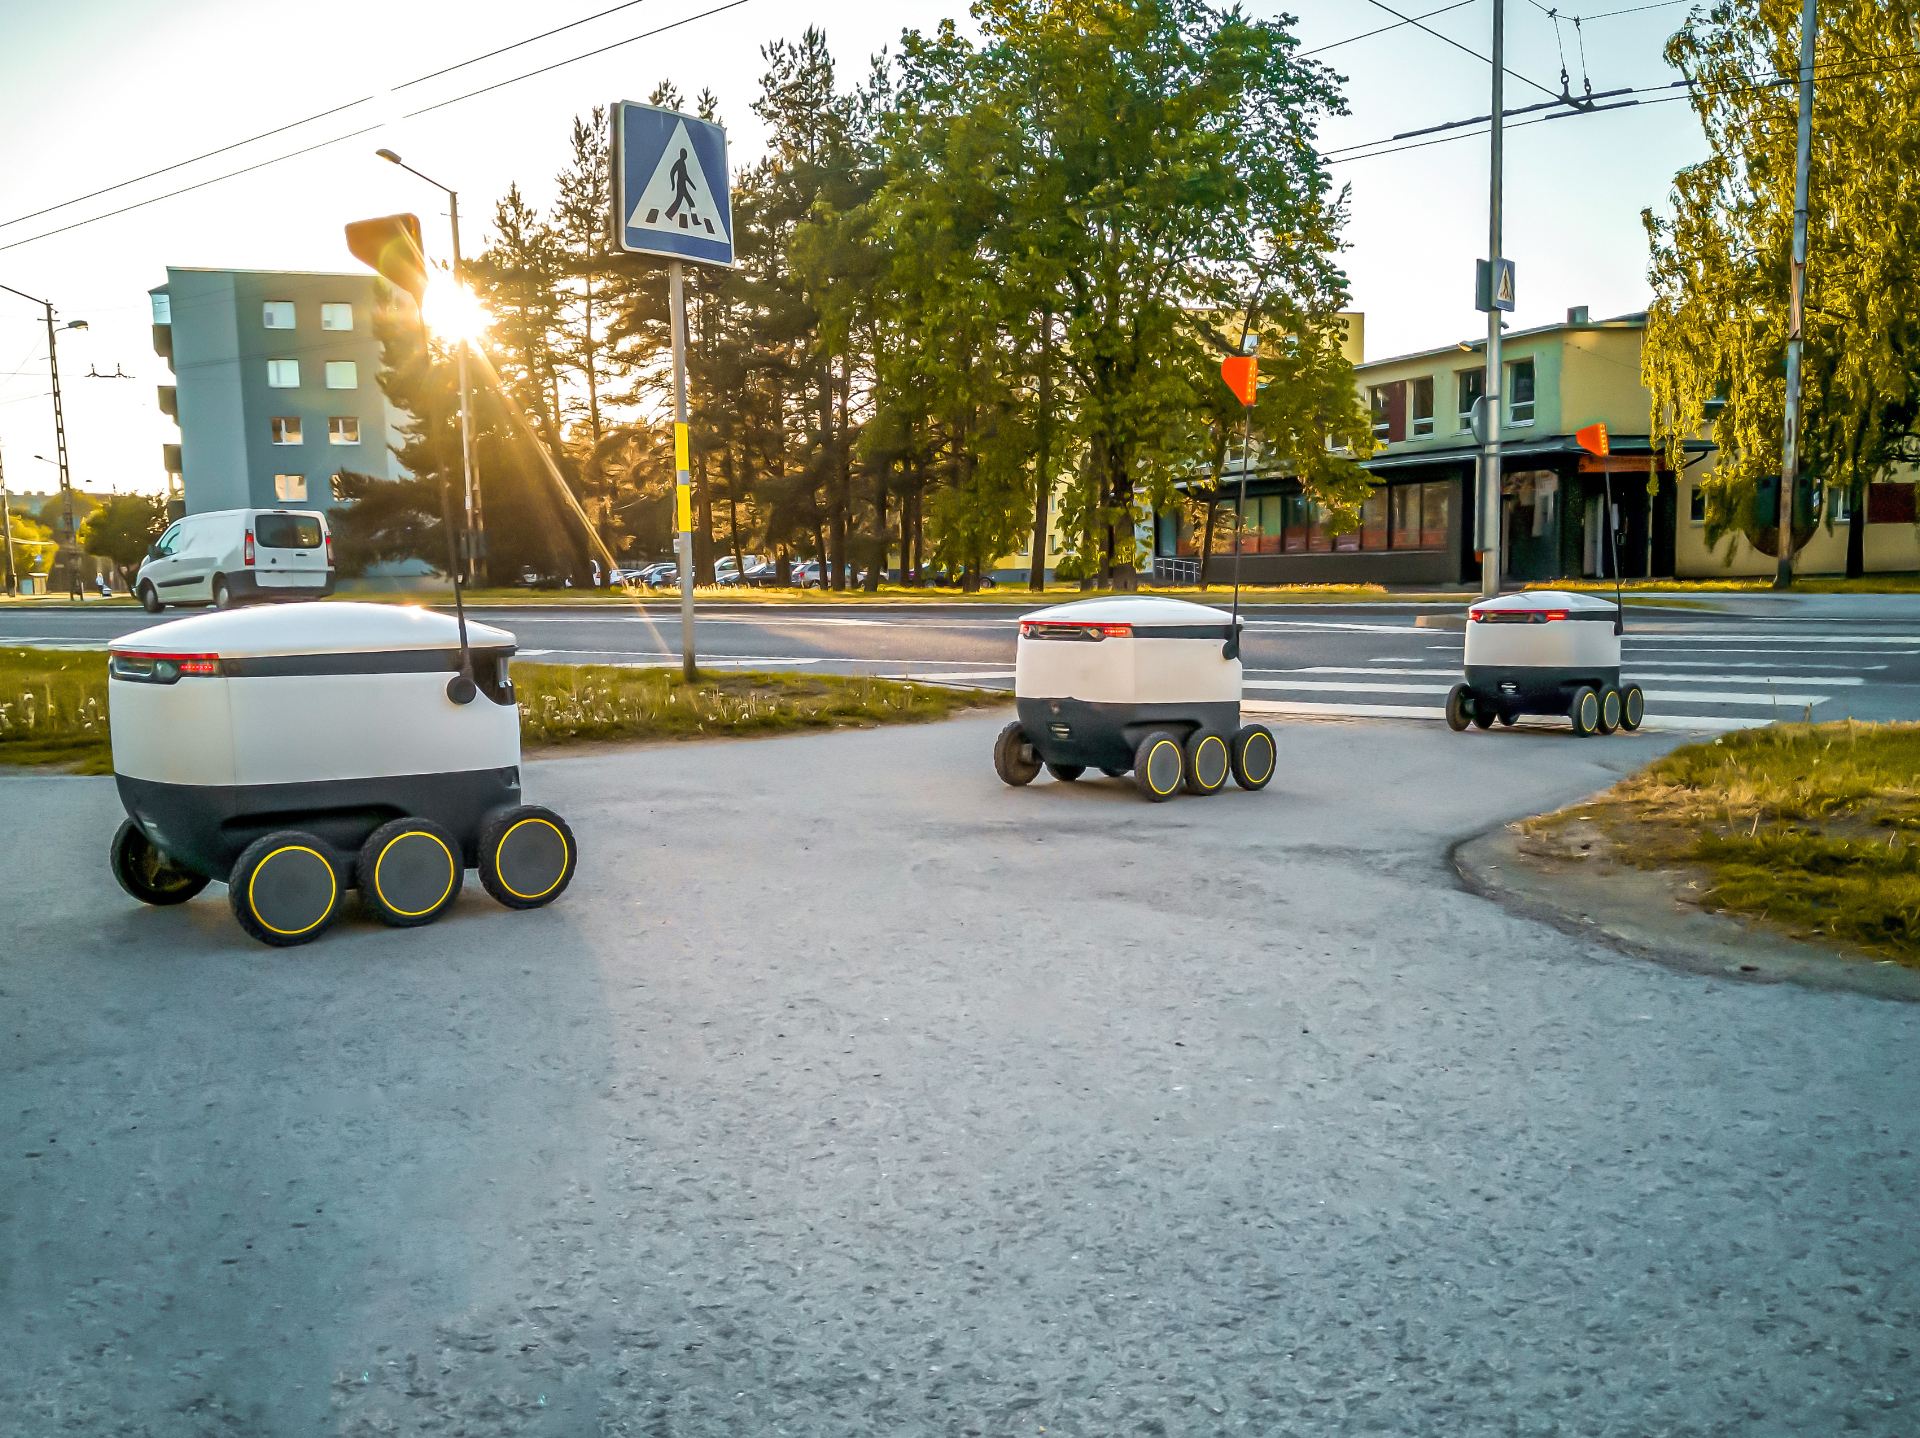 Shopping with delivery robots arrives in cities